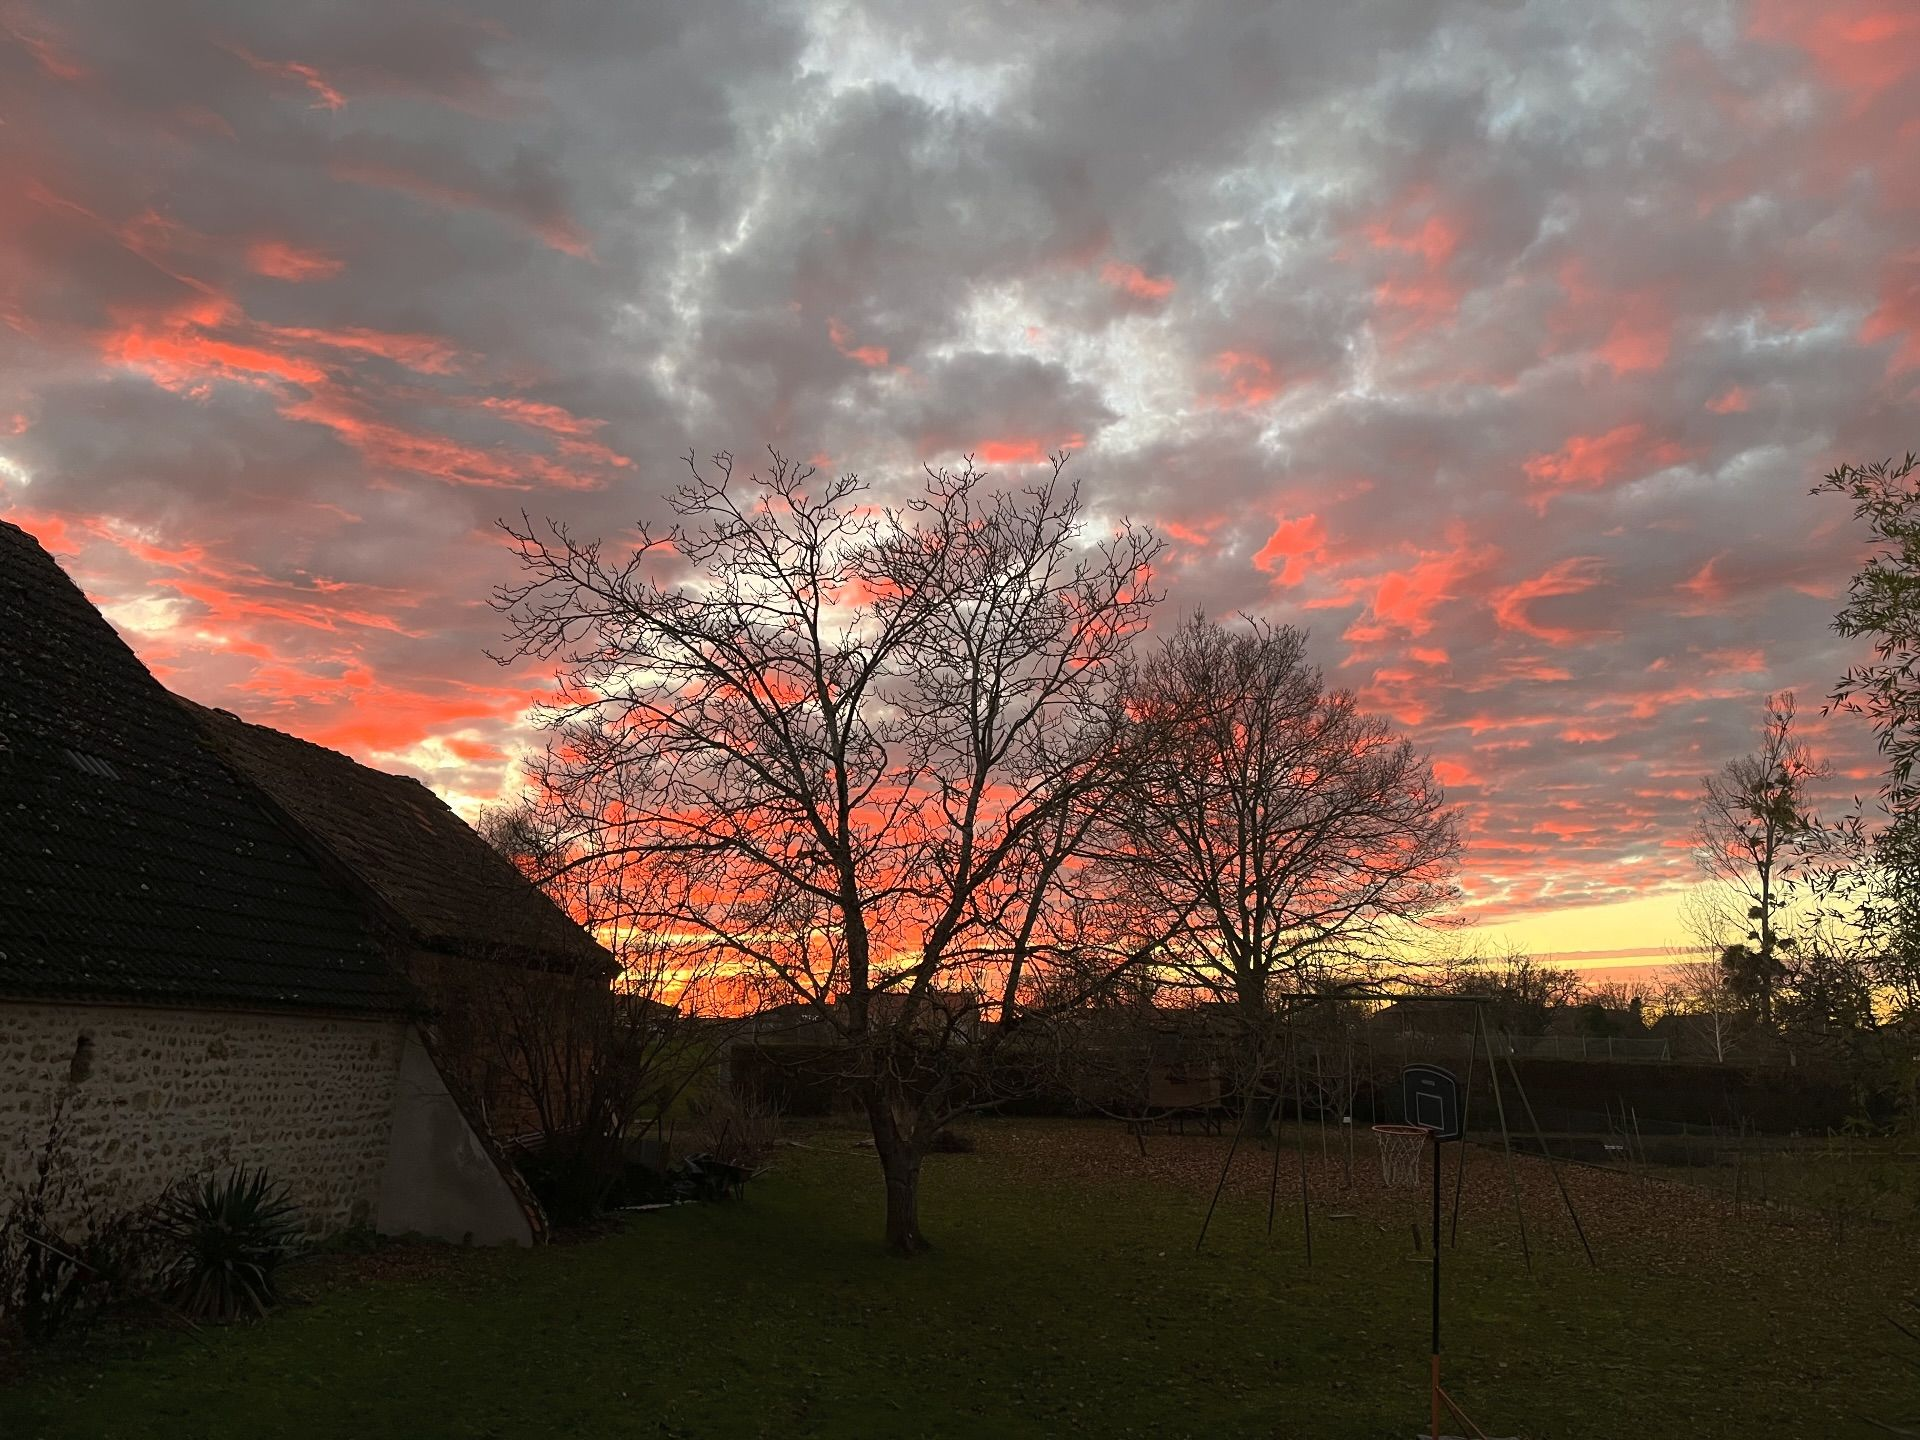 Example image, red sky in the country side